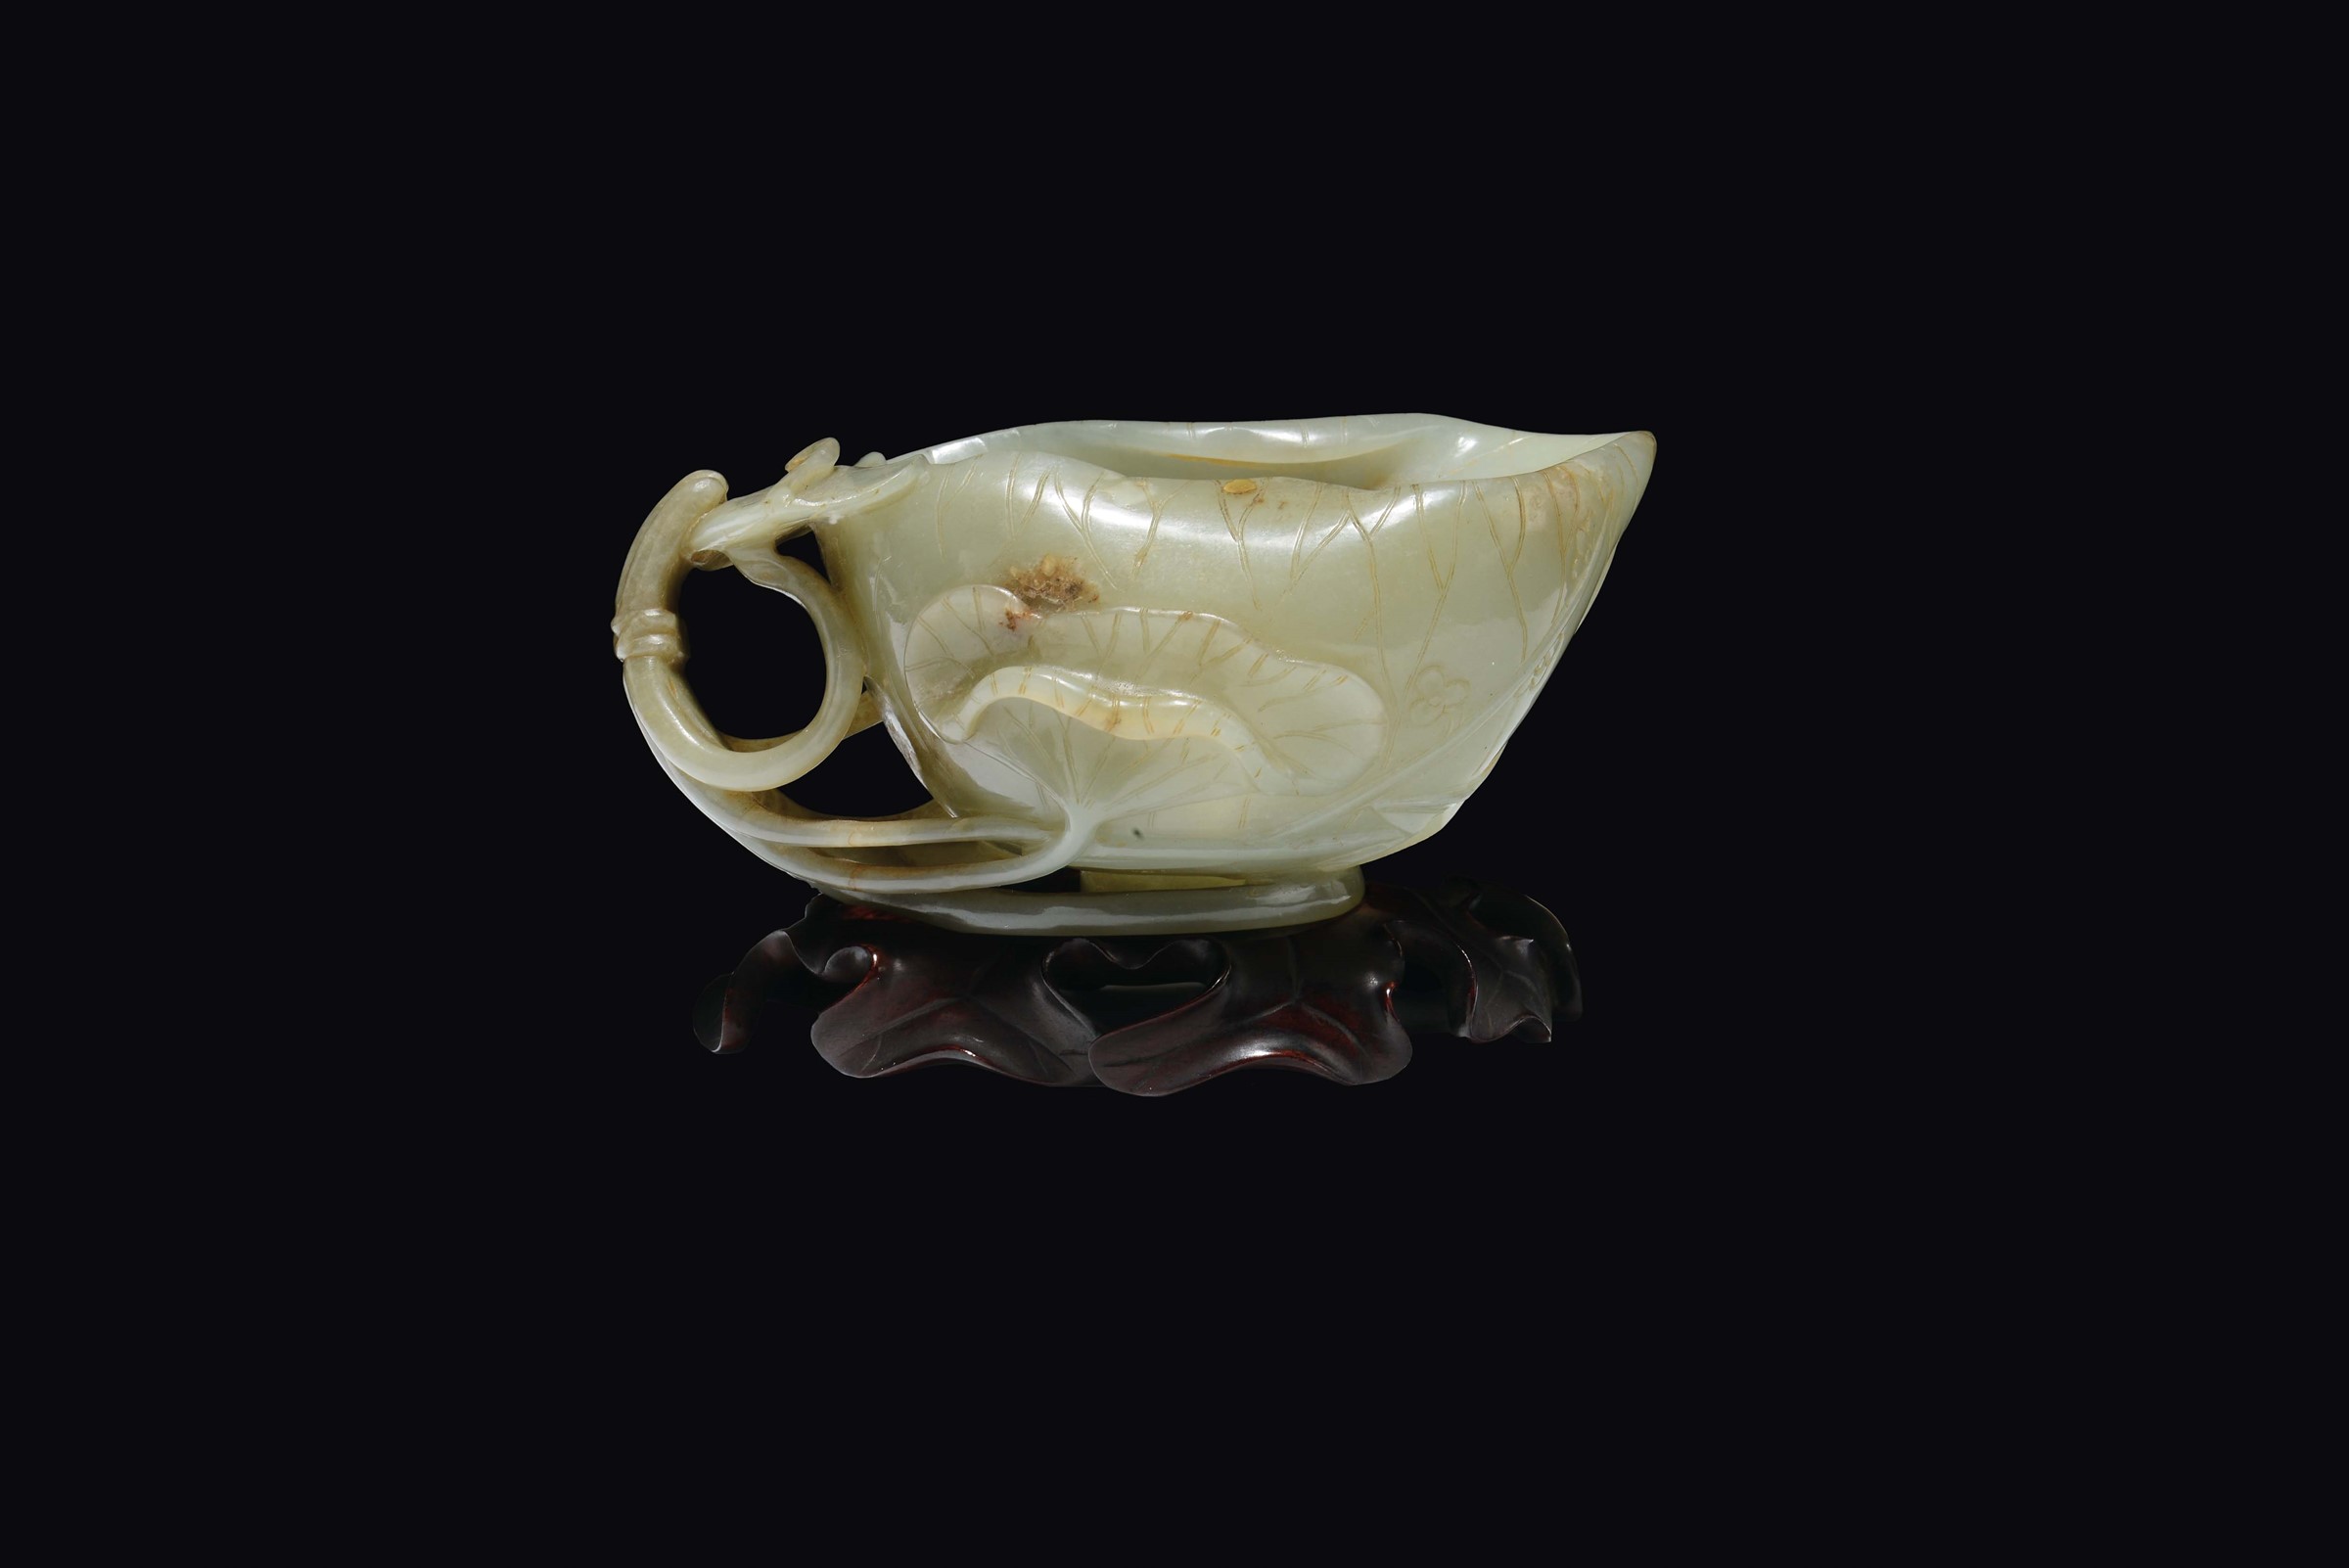 A Celadon white and russet jade "flower and branch" cup, China, Qing Dynasty, Qianlong Period (